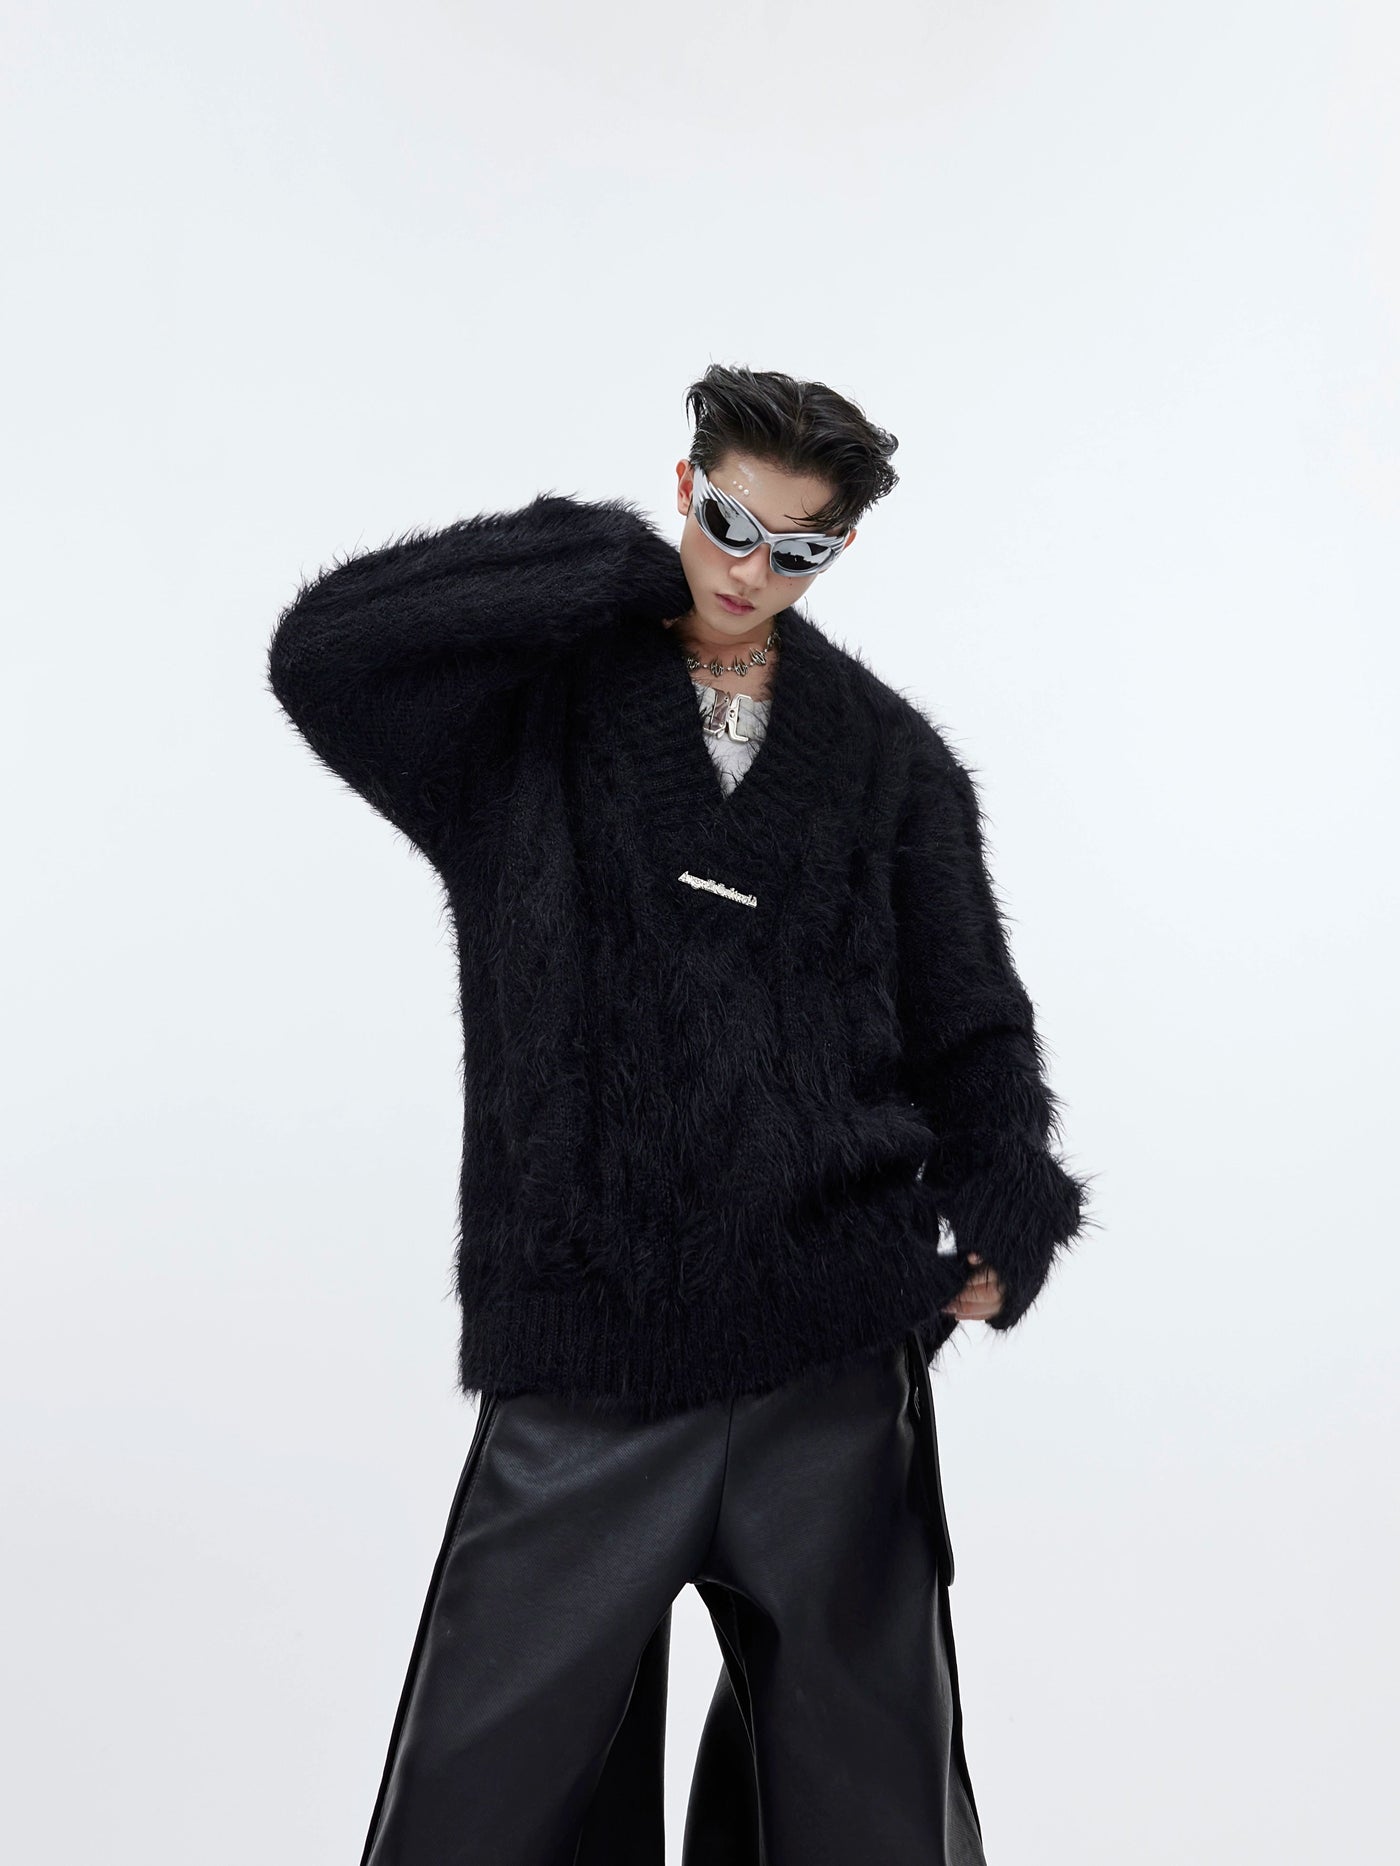 V-Neck Thick Fur Sweater Korean Street Fashion Sweater By Argue Culture Shop Online at OH Vault